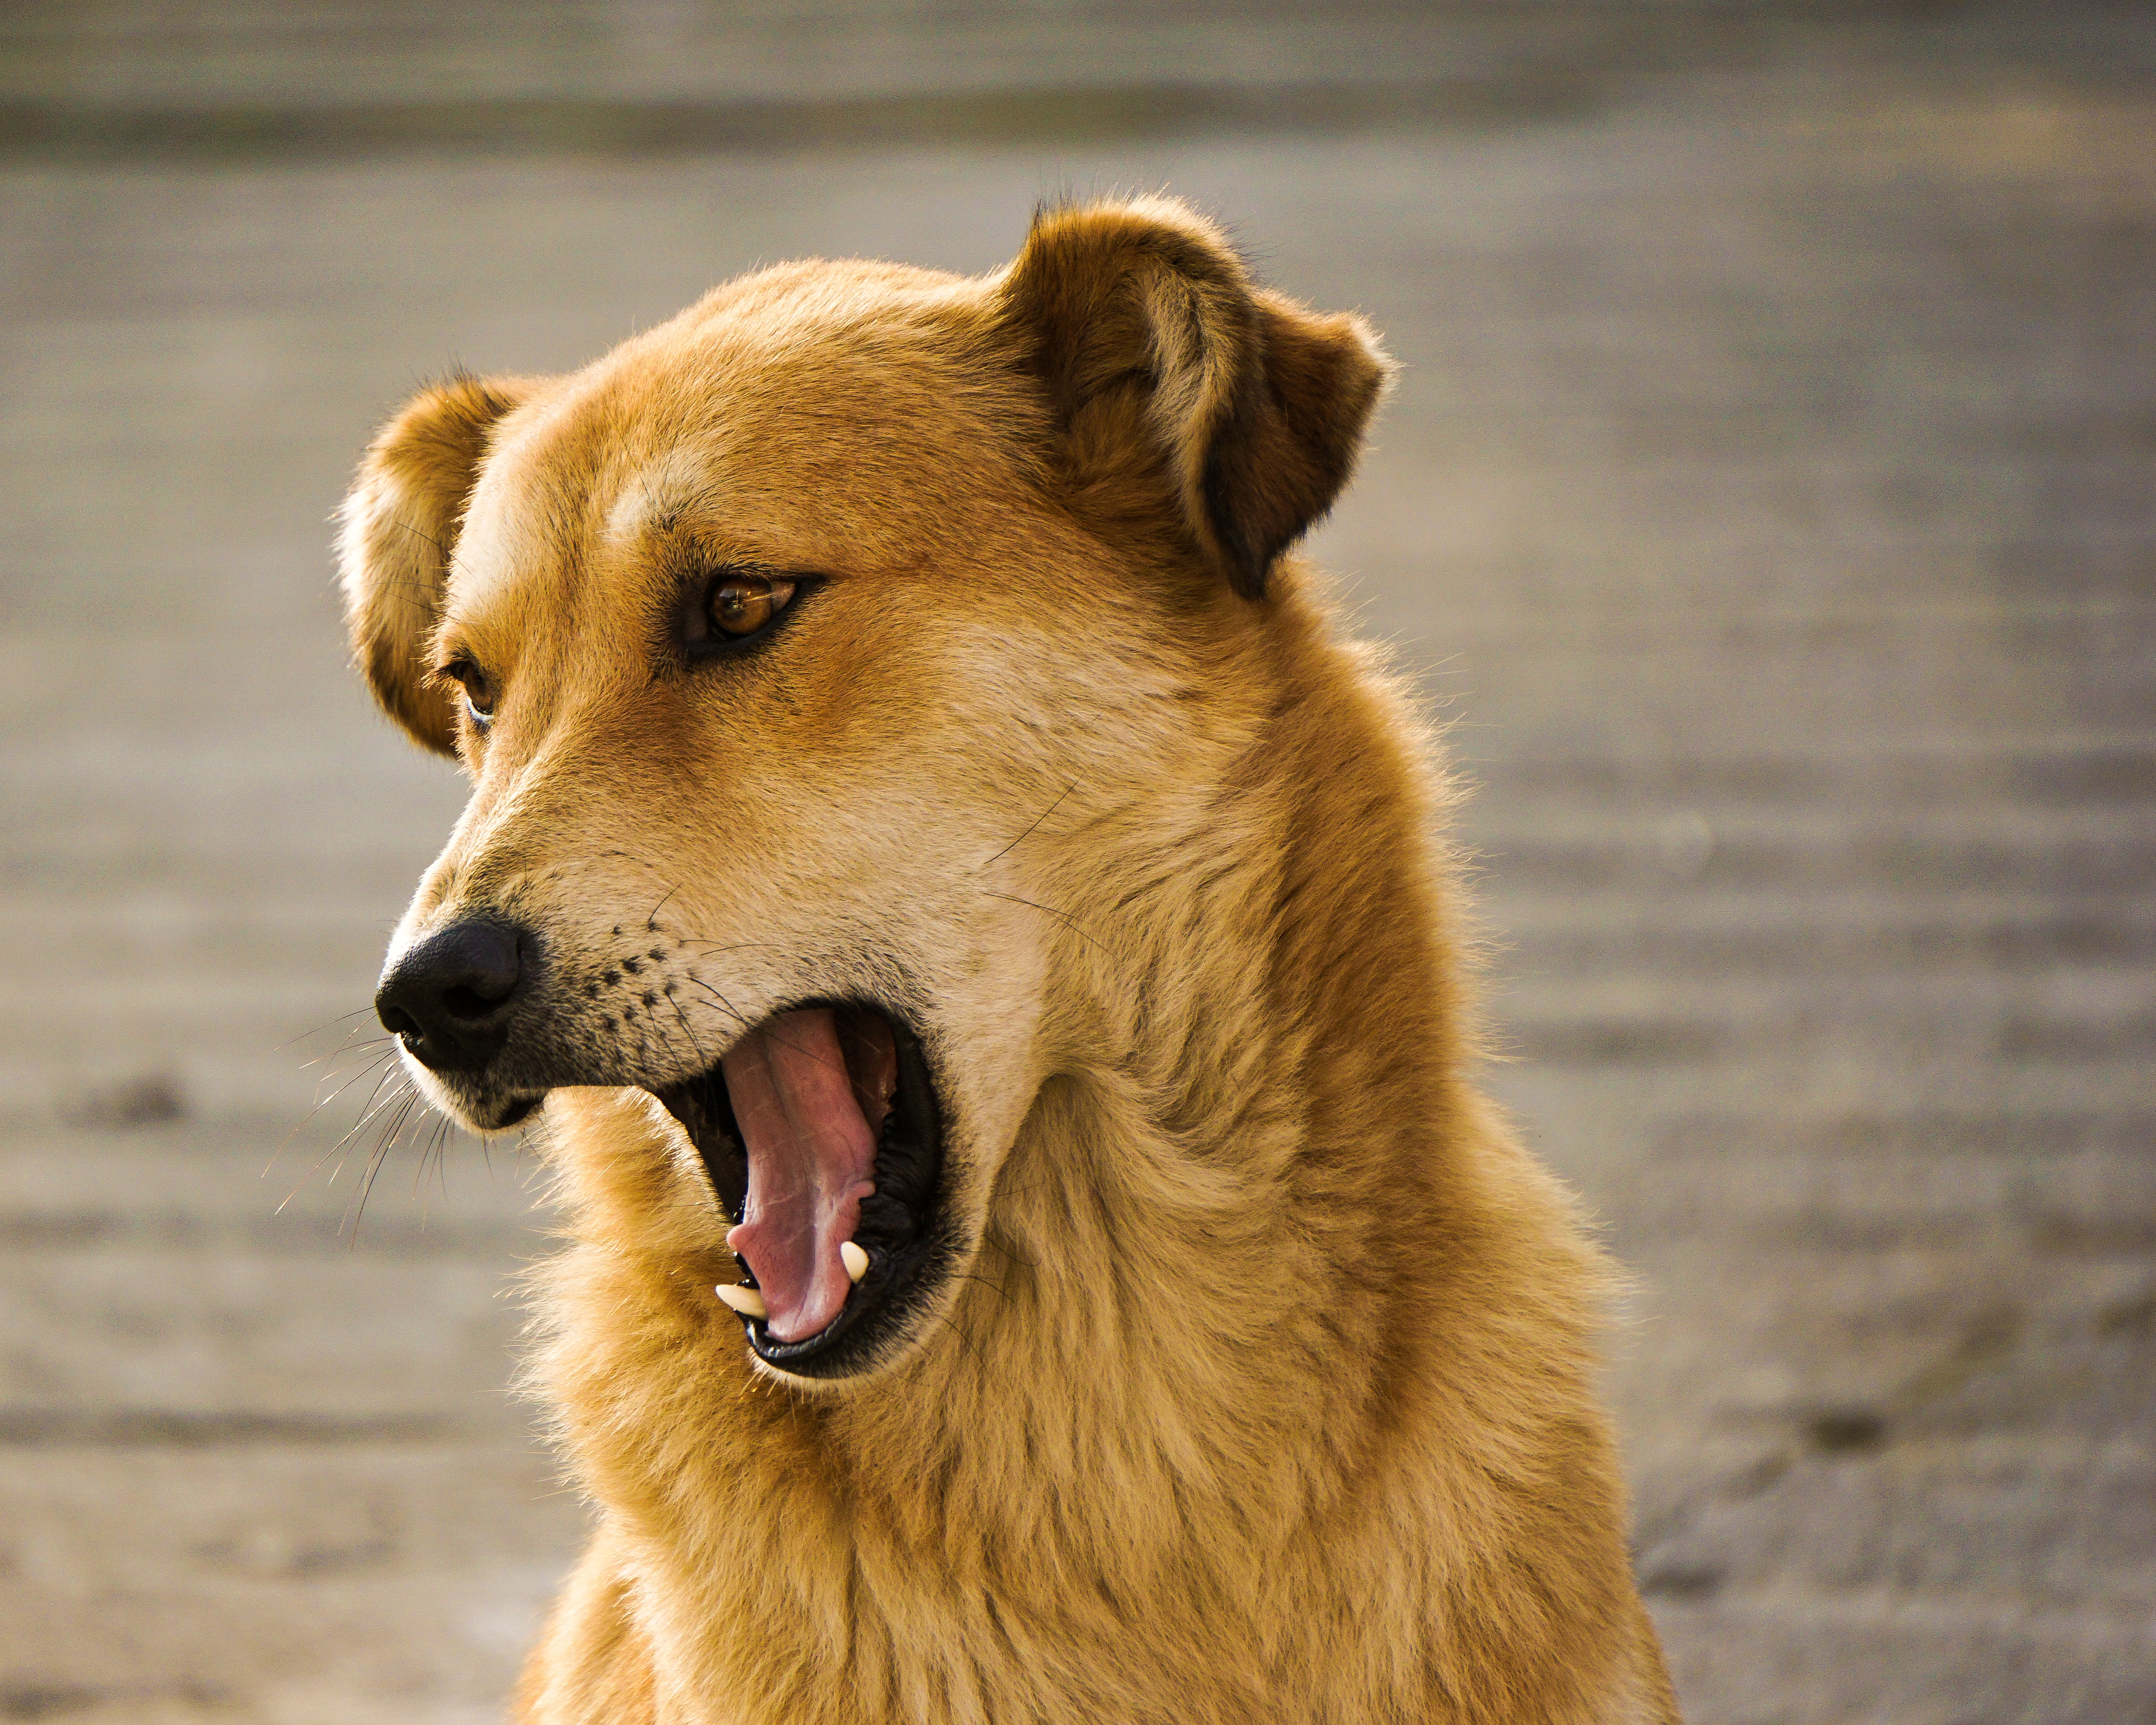 Why Do Dogs Sneeze? There a lot to Know From a Sneeze! |